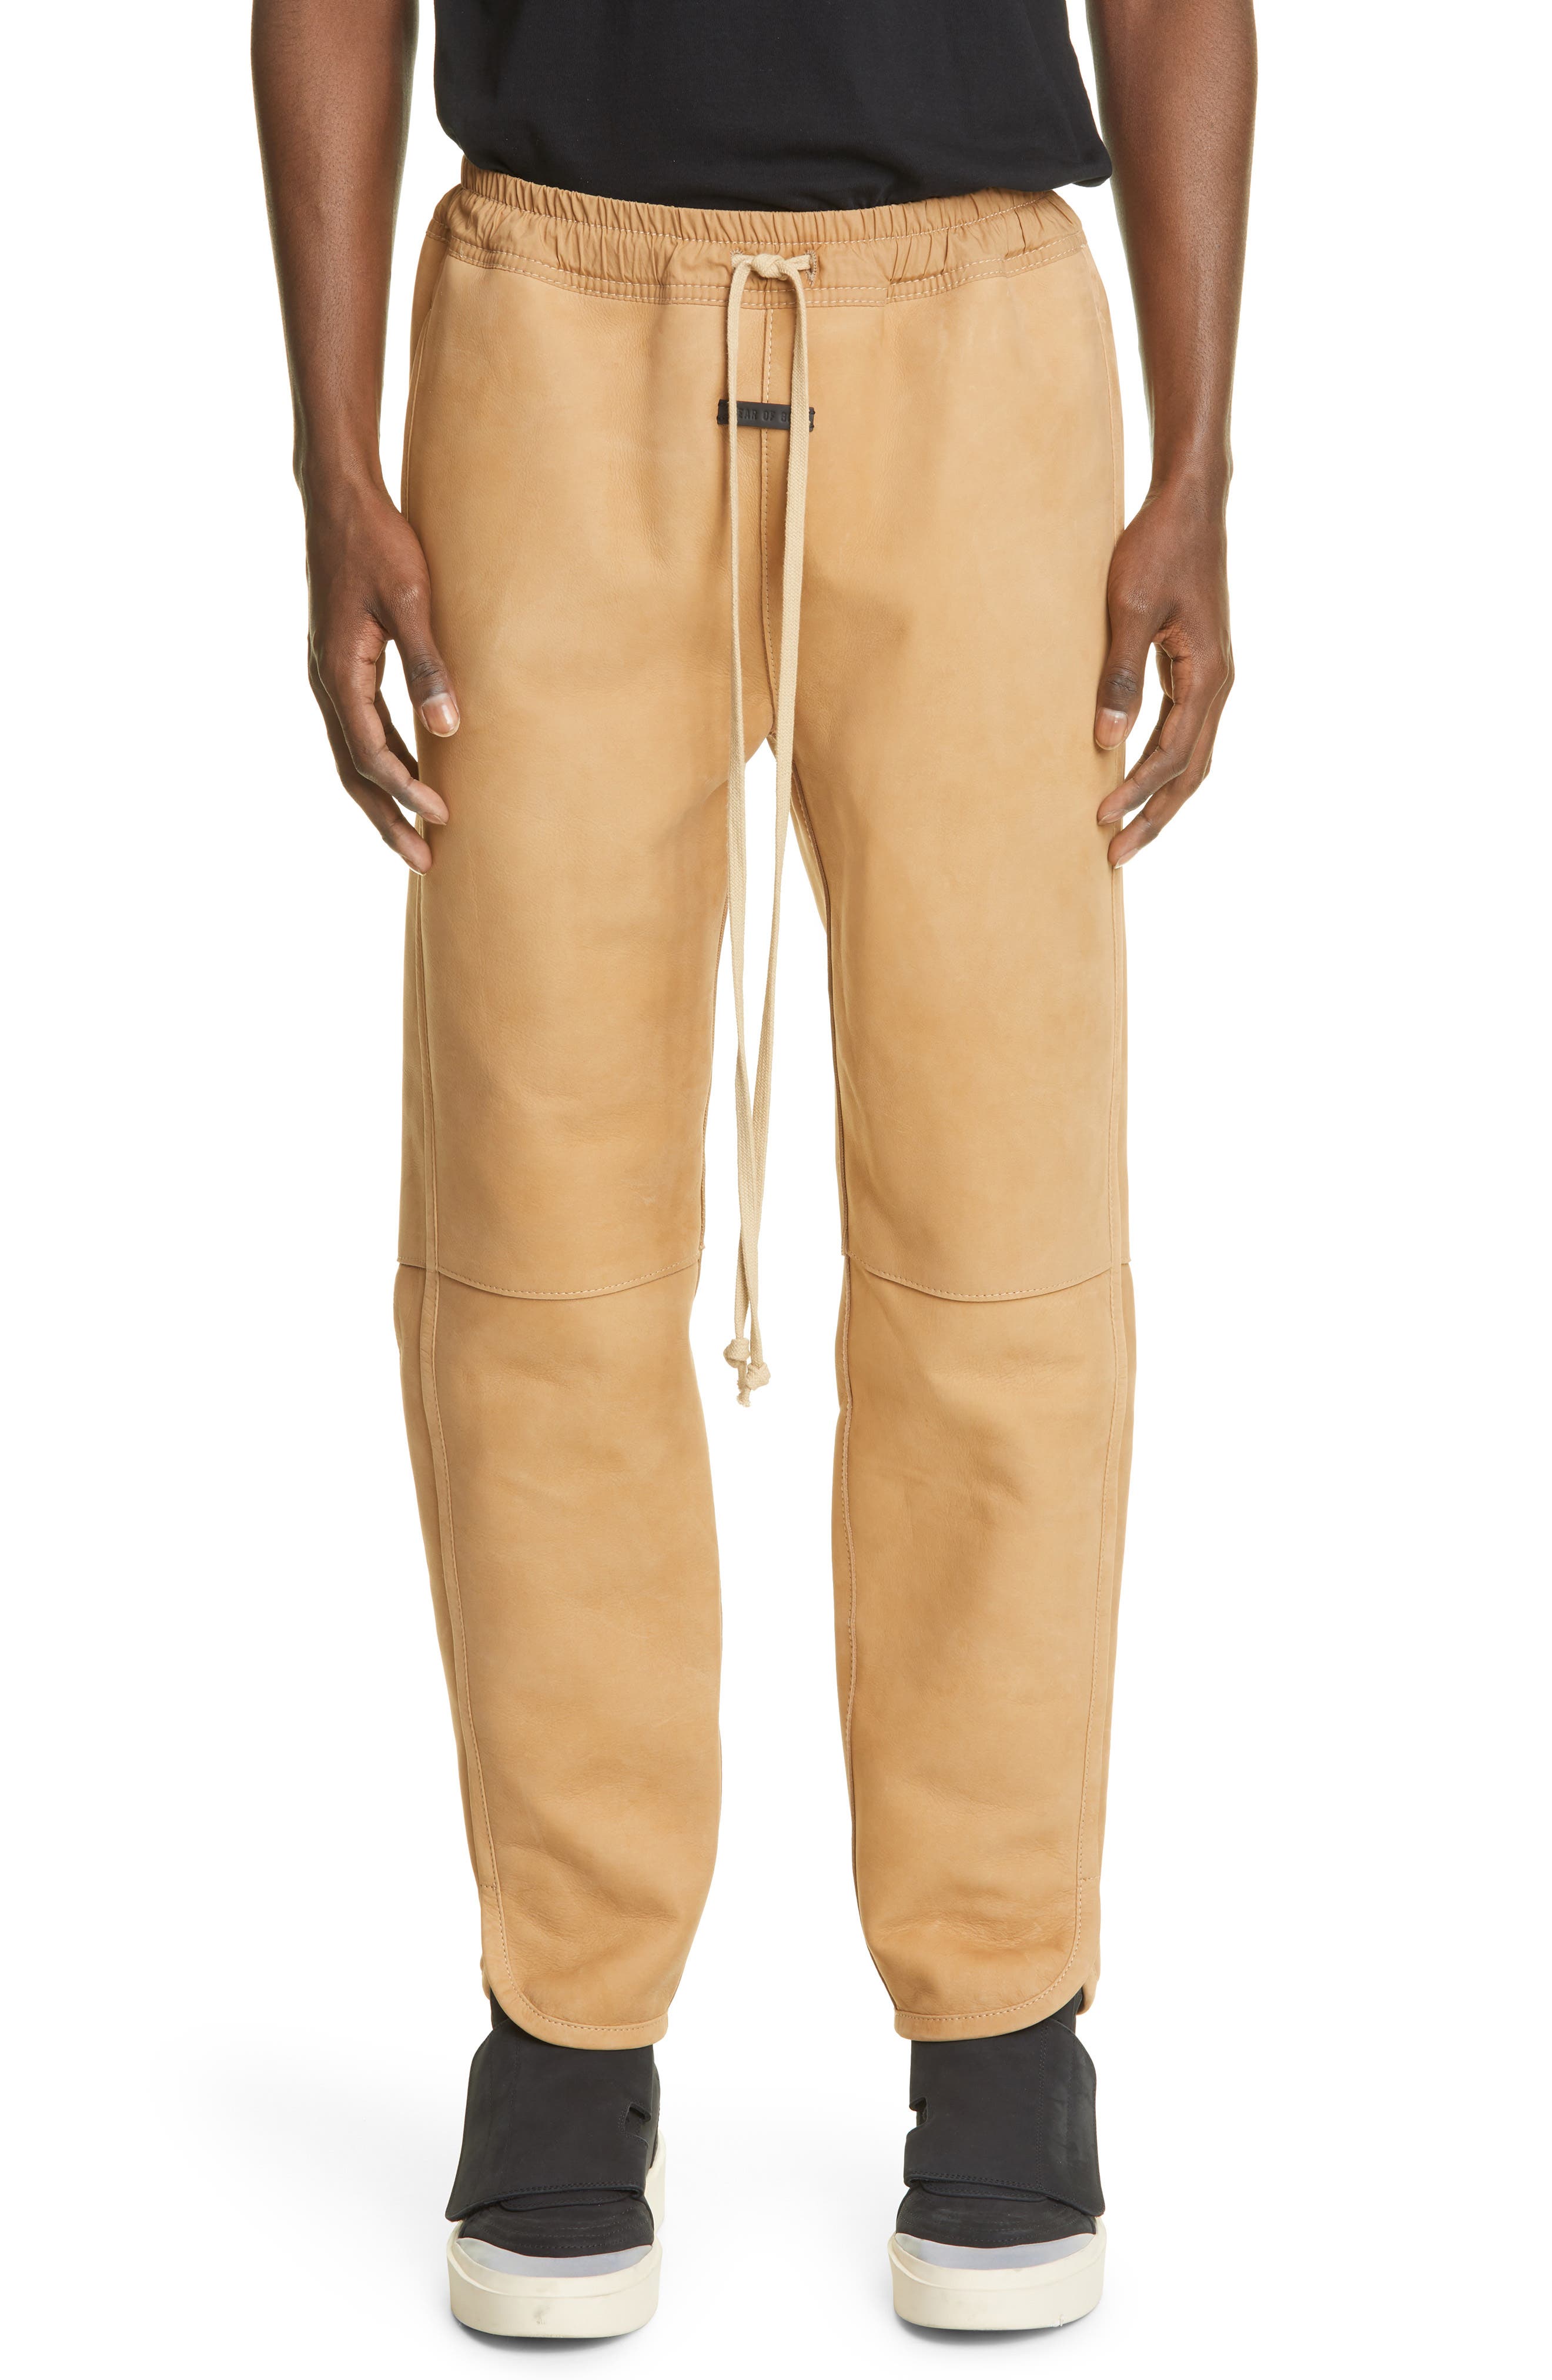 Fear of God Nubuck Leather Track Pants in Tan at Nordstrom, Size Medium